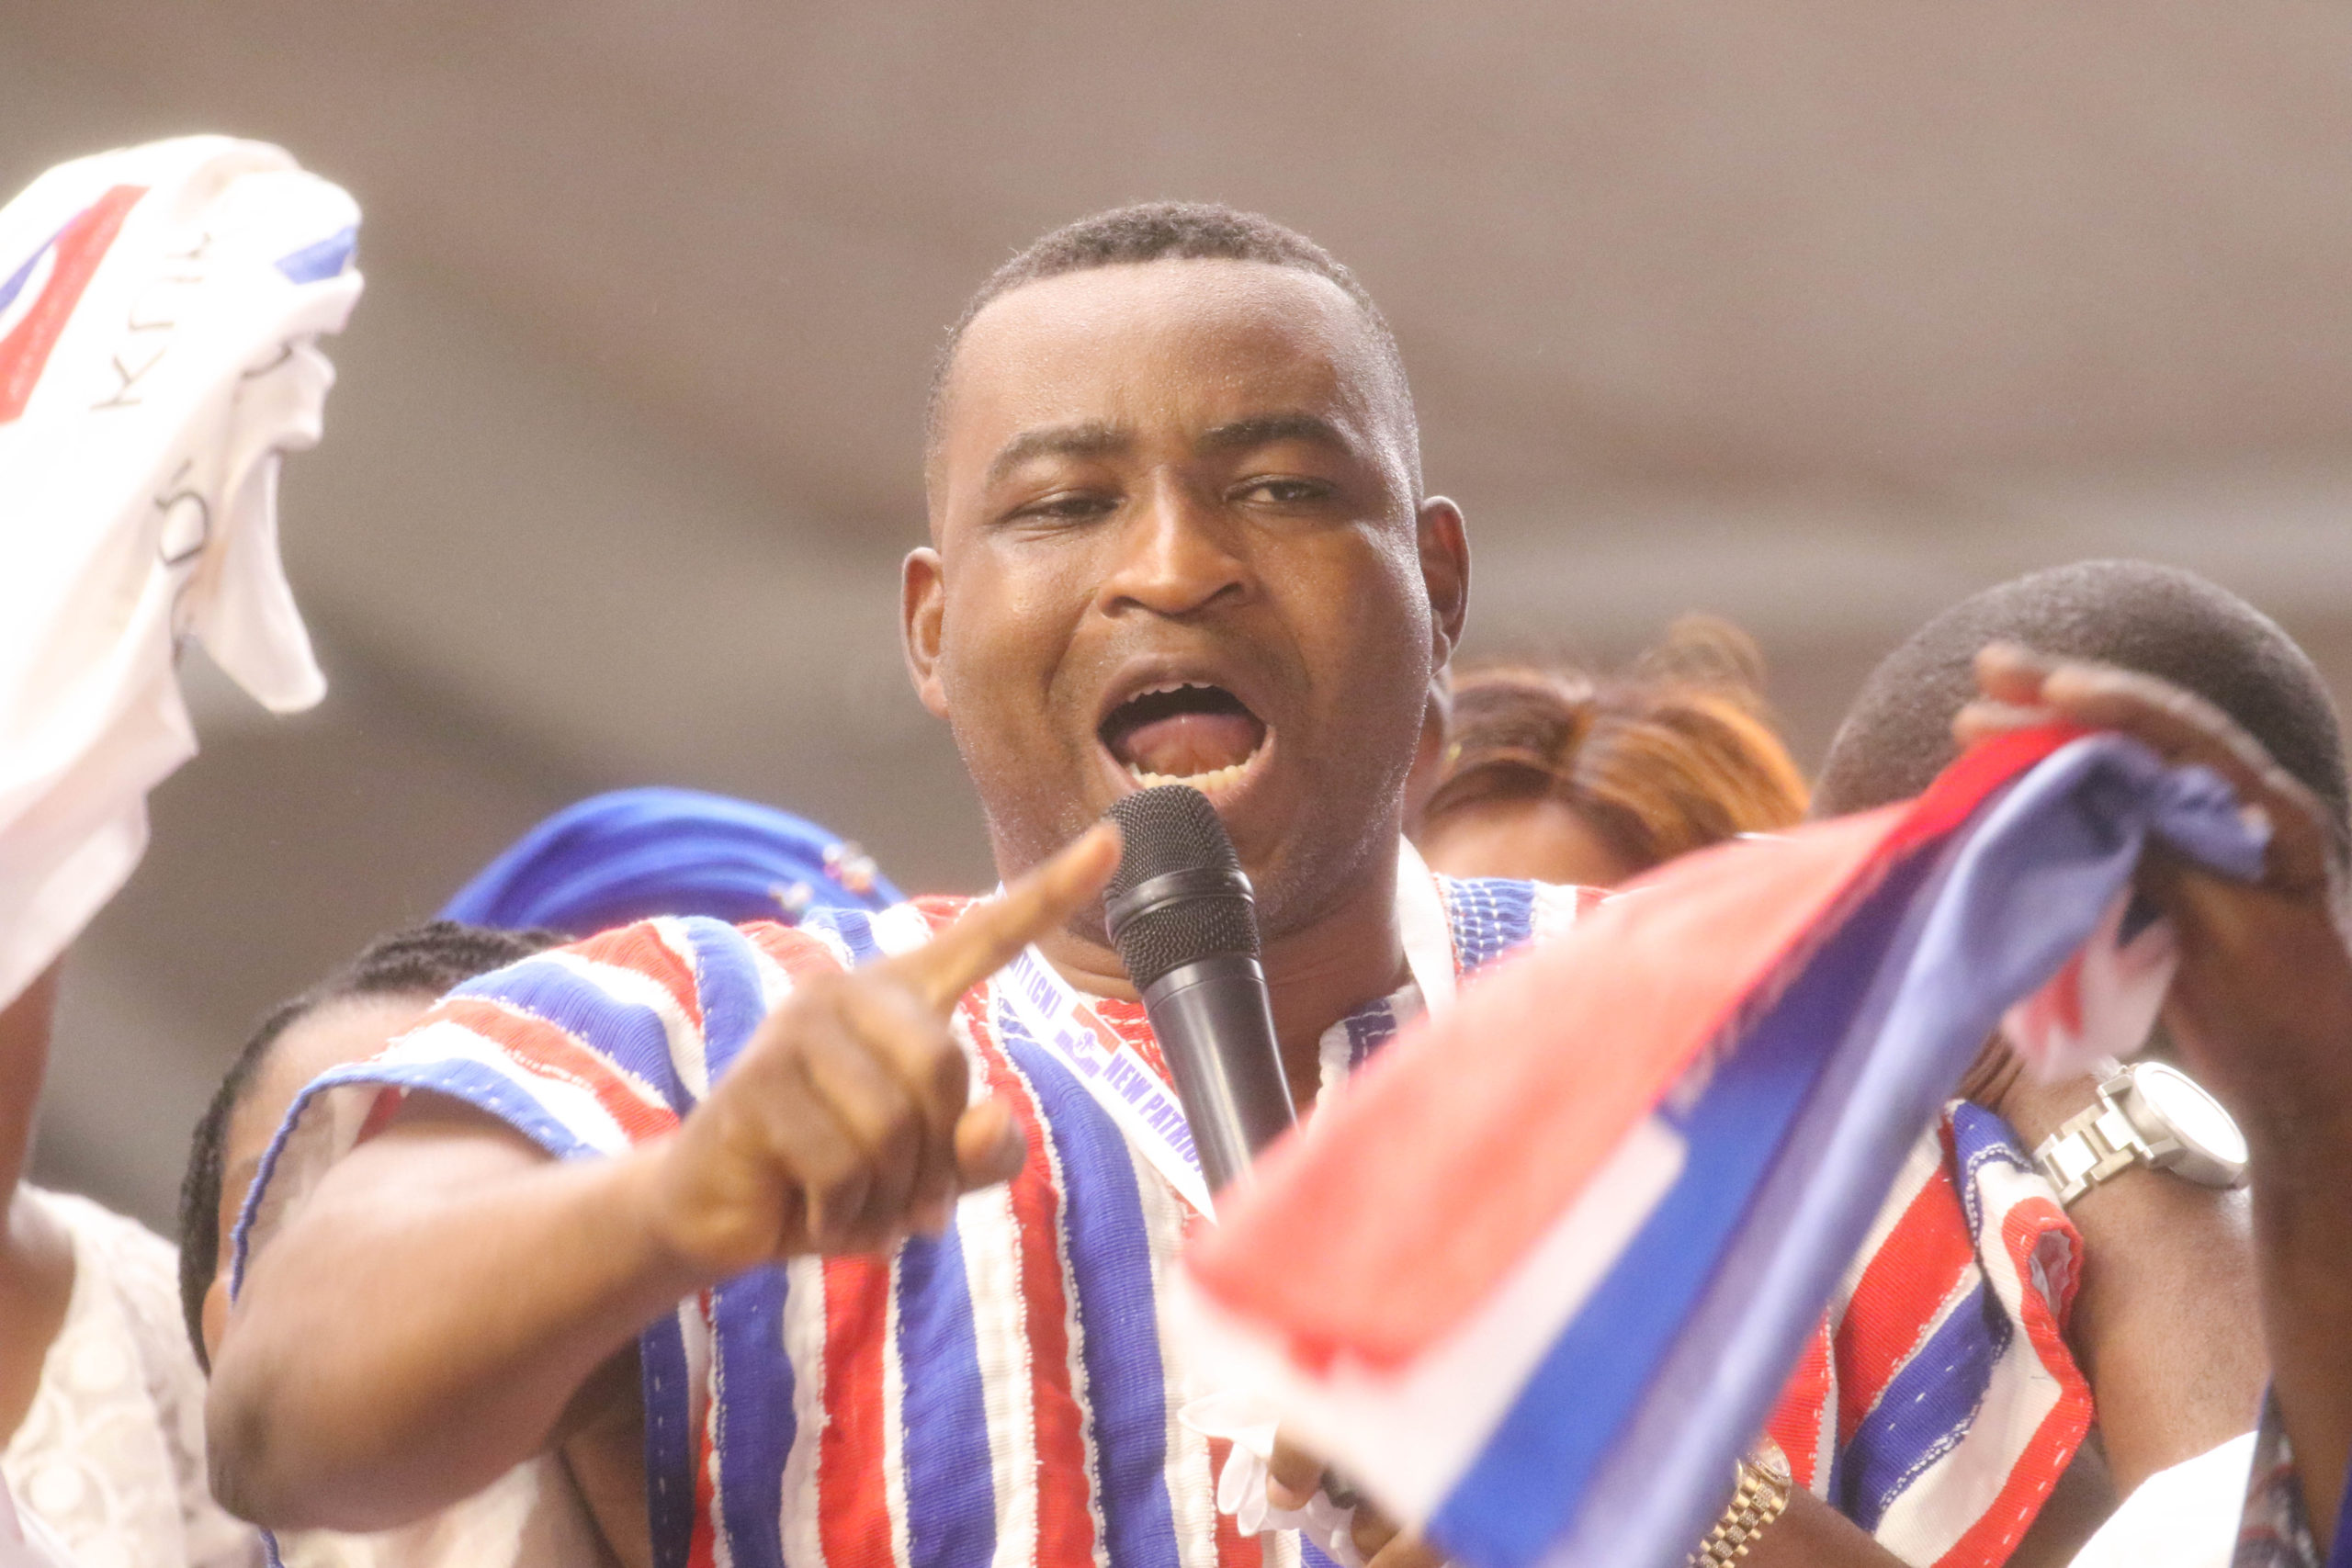 NPP delegates conference: Ghana is better than UK and USA - Chairman Wontumi